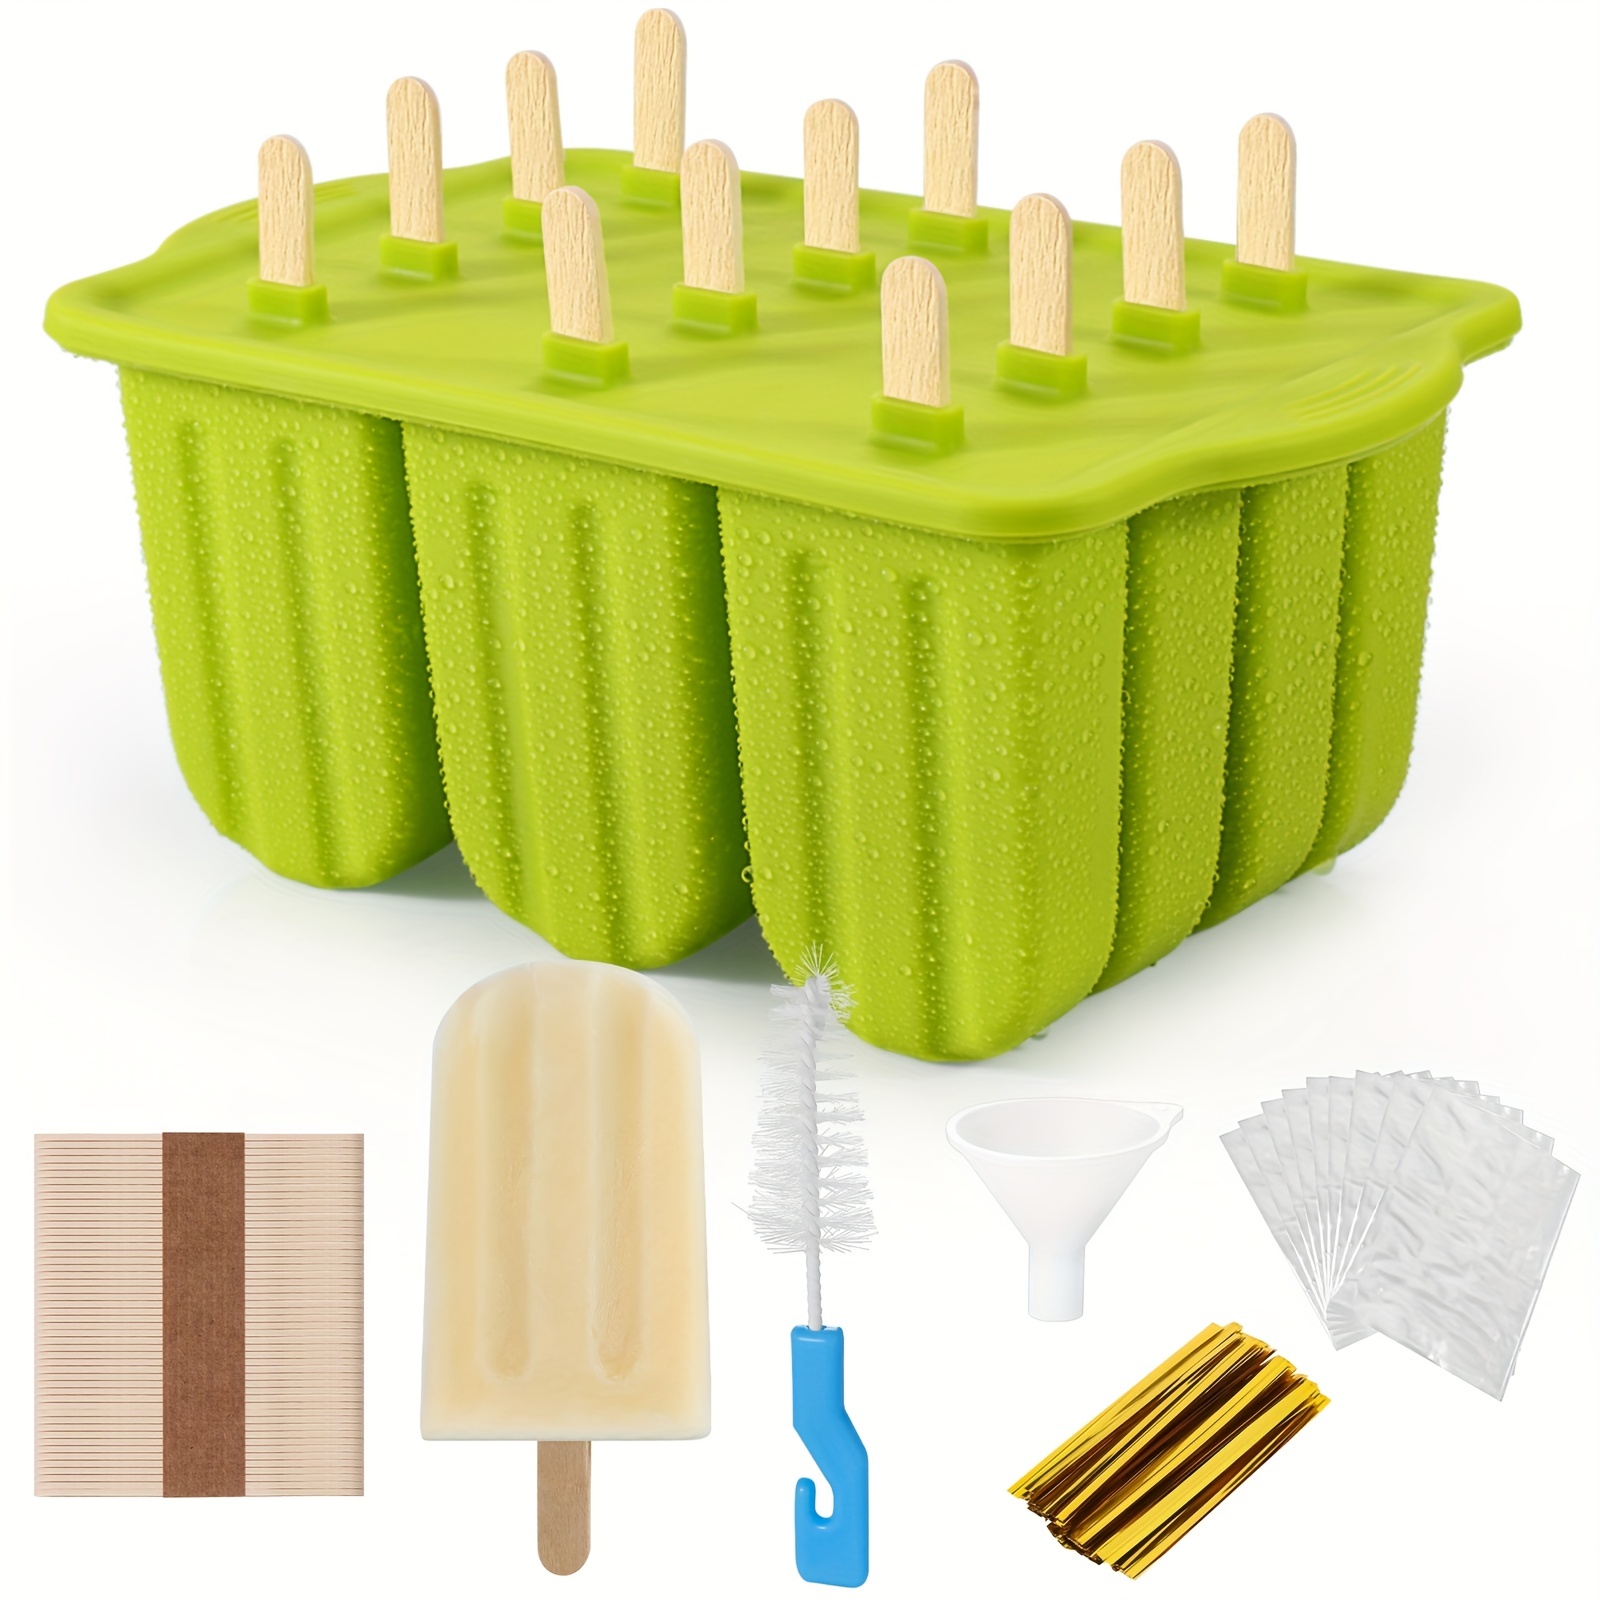 2 PCS Ice Pop Molds Silicone Large Popsicle Molds With Lids for Kid  Stackable Cake Pop Mold With Reusable Sticks for Homemade Popsicles Cake 